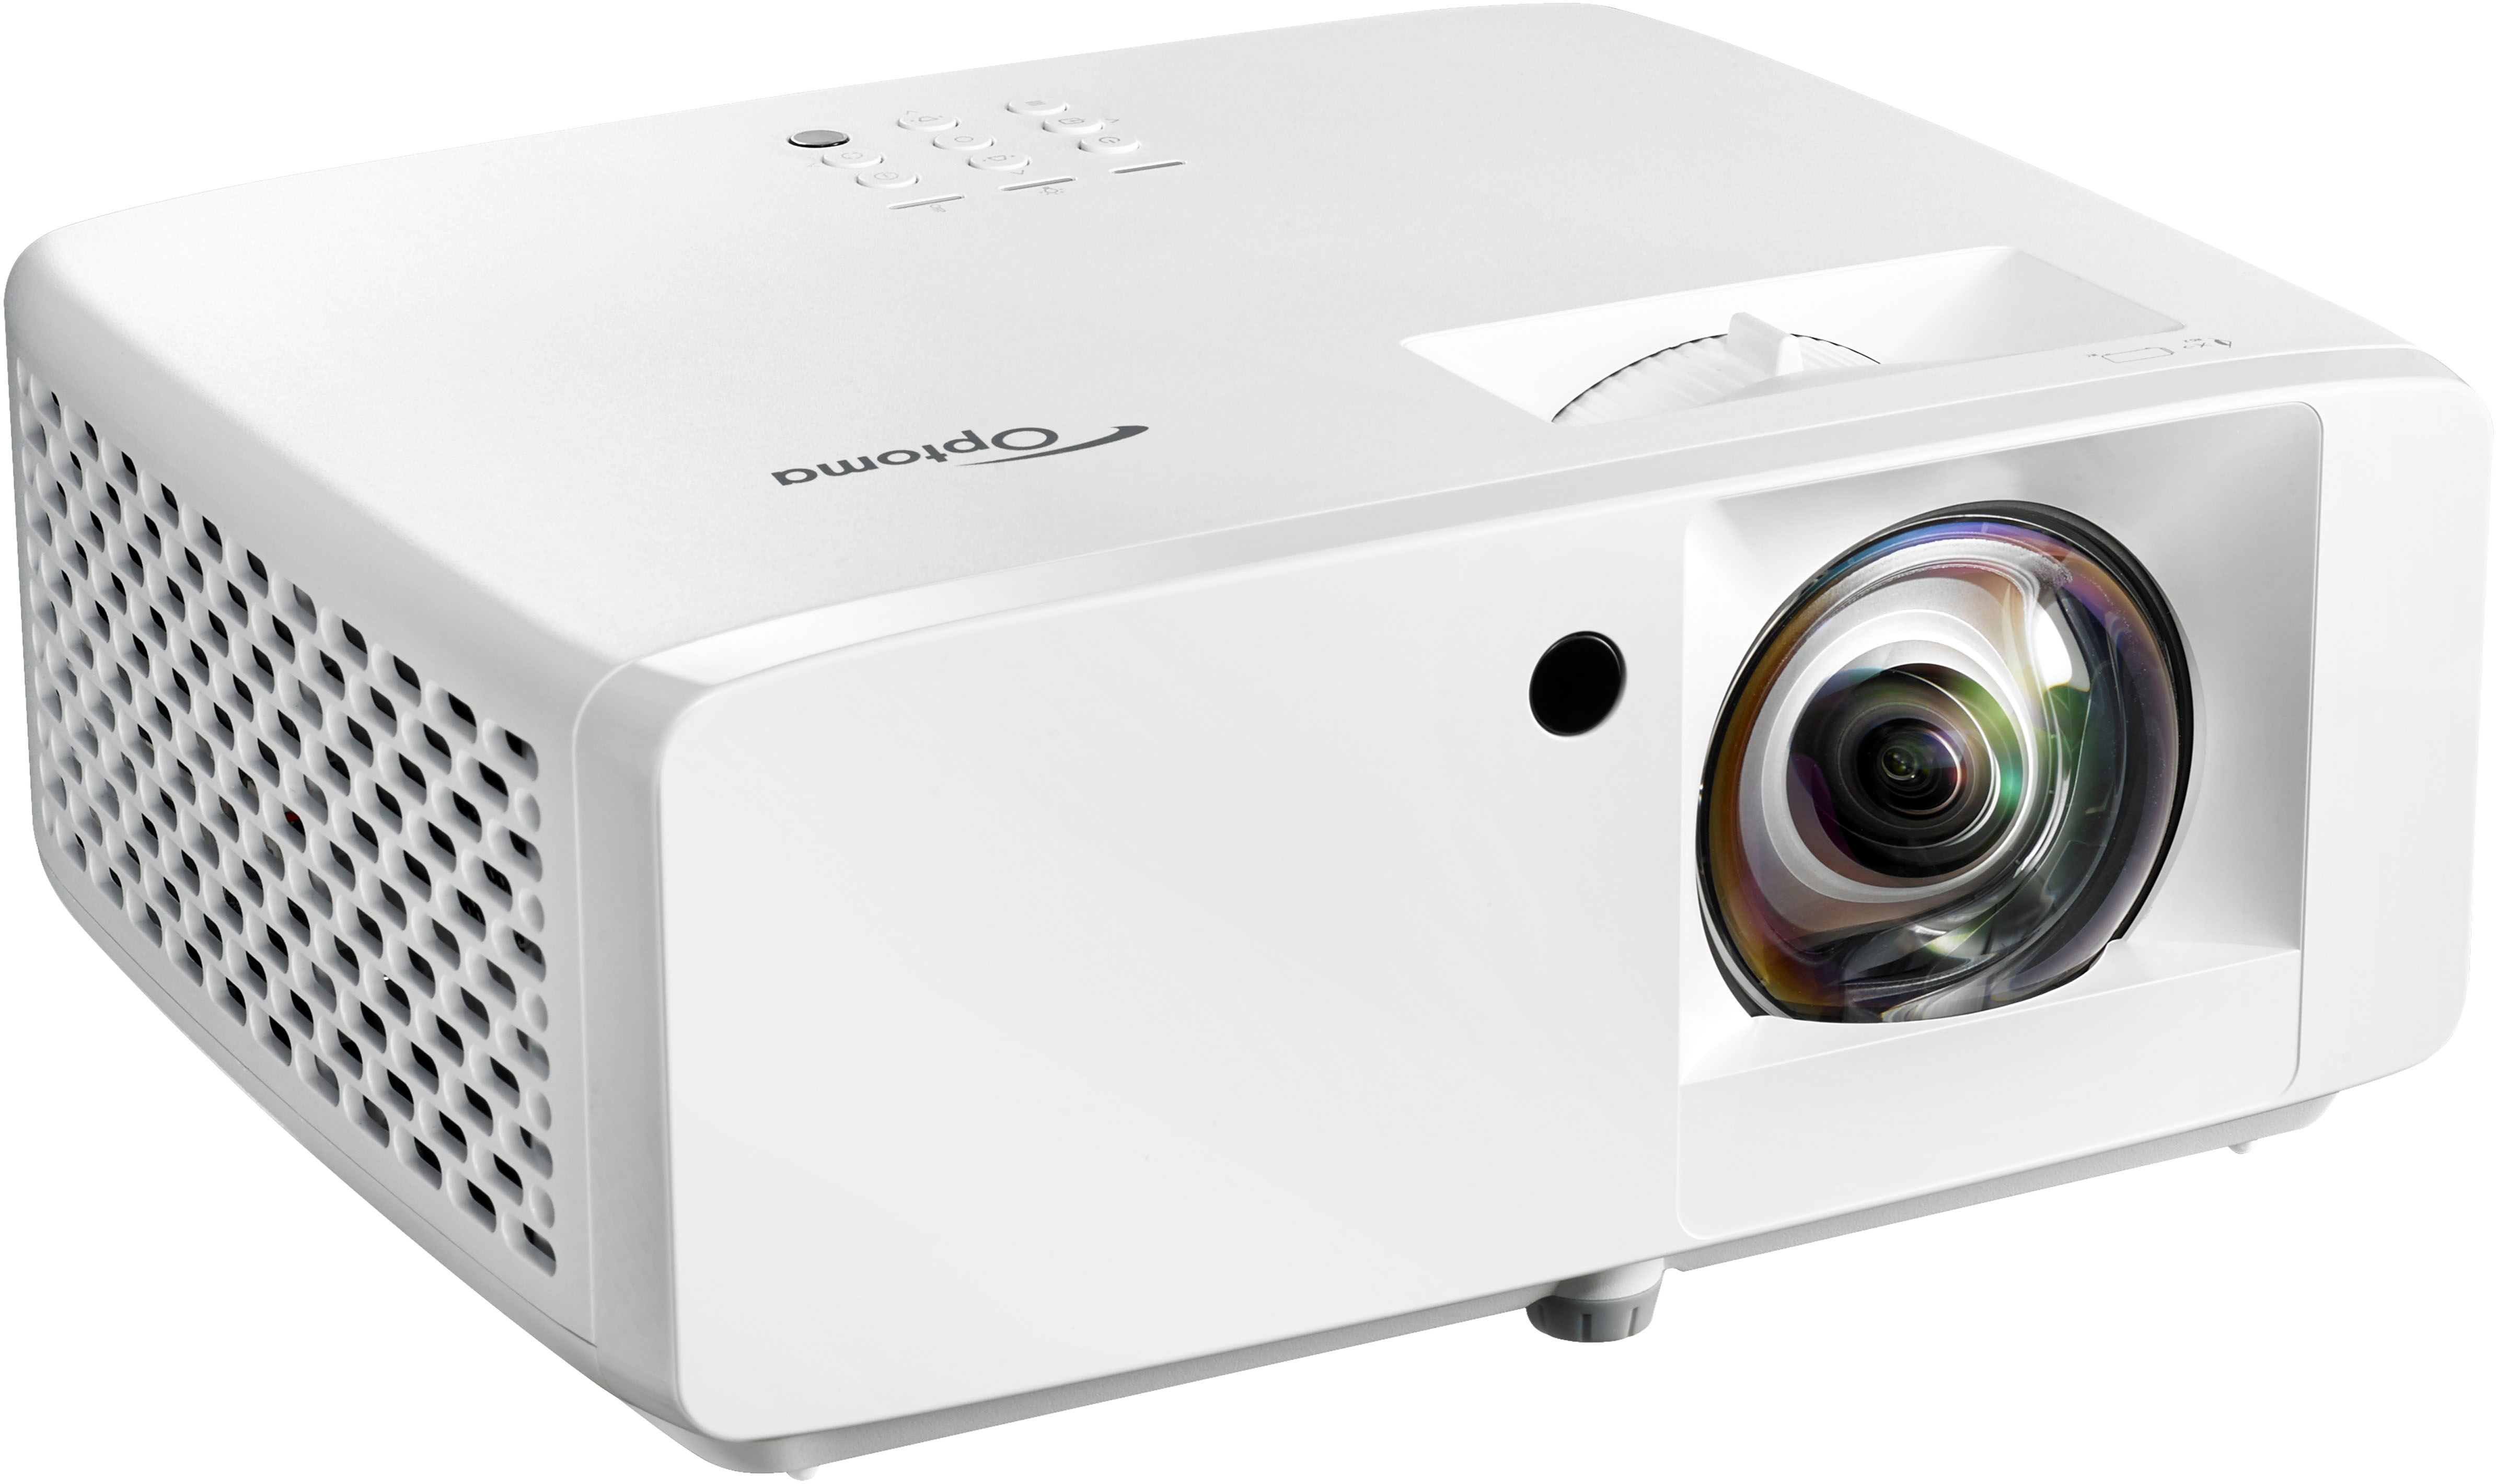 Left View: ViewSonic - PG706WU 4000 Lumens WUXGA Projector with RJ45 LAN Control, Vertical Keystone and Optical Zoom - White